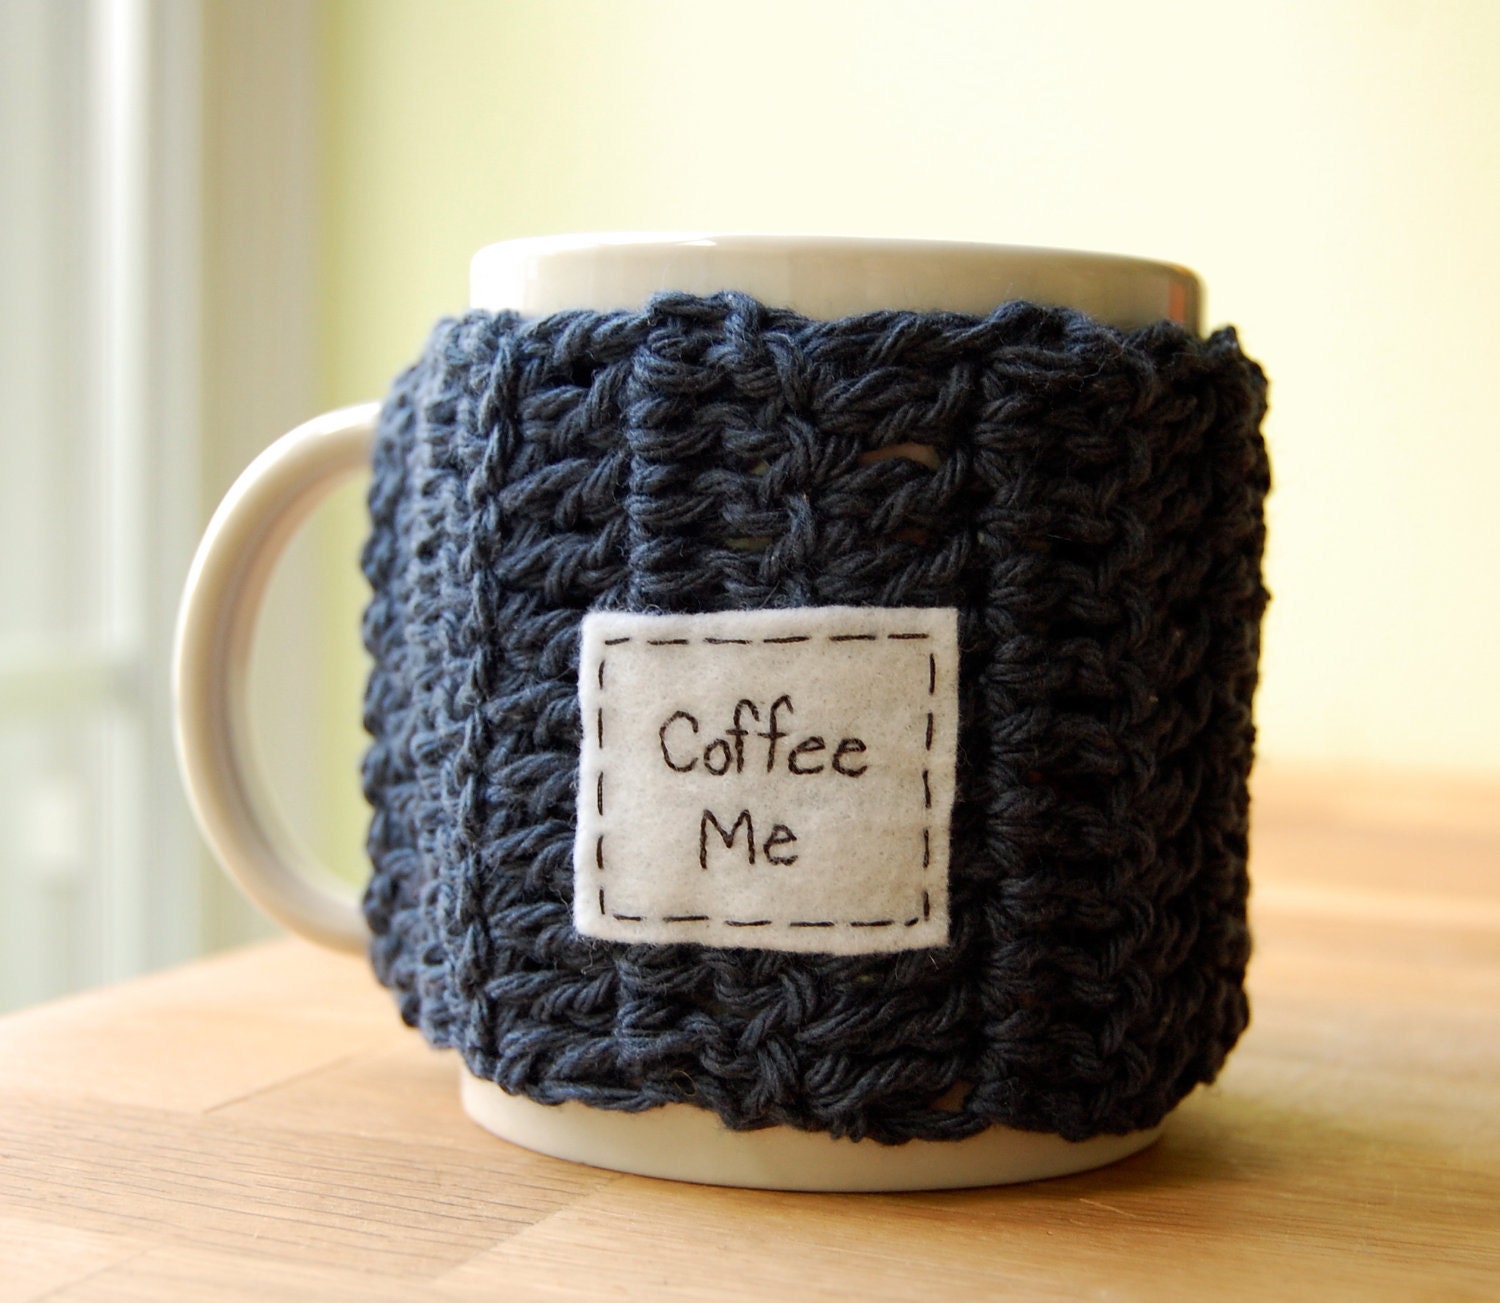 Coffee Me Mug Cozy Denim Crocheted Java Cup Cosy - Made to Order